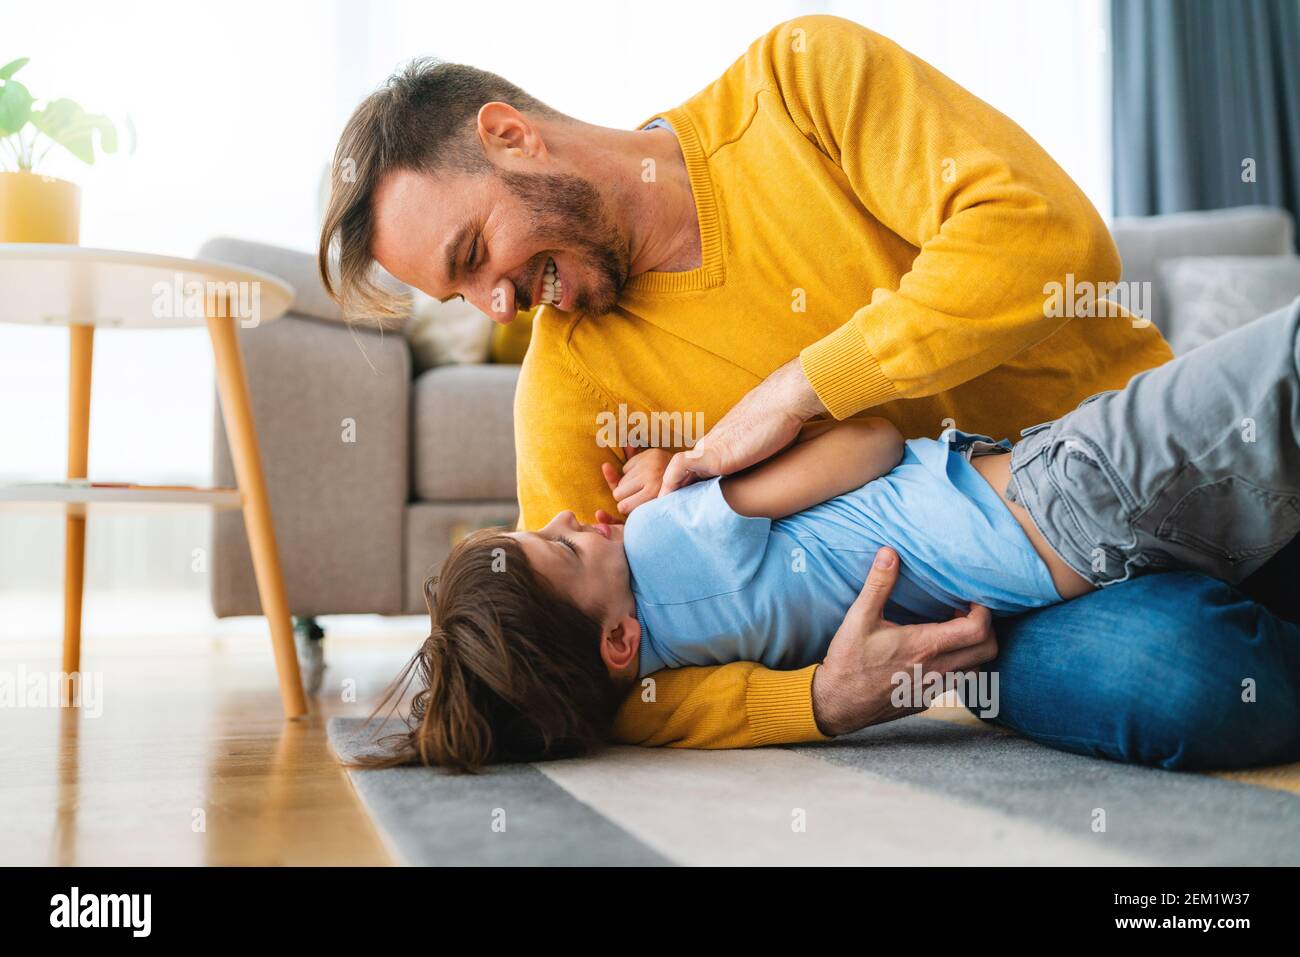 Joyful toddler boy having fun, playing with his father together at home. Stock Photo